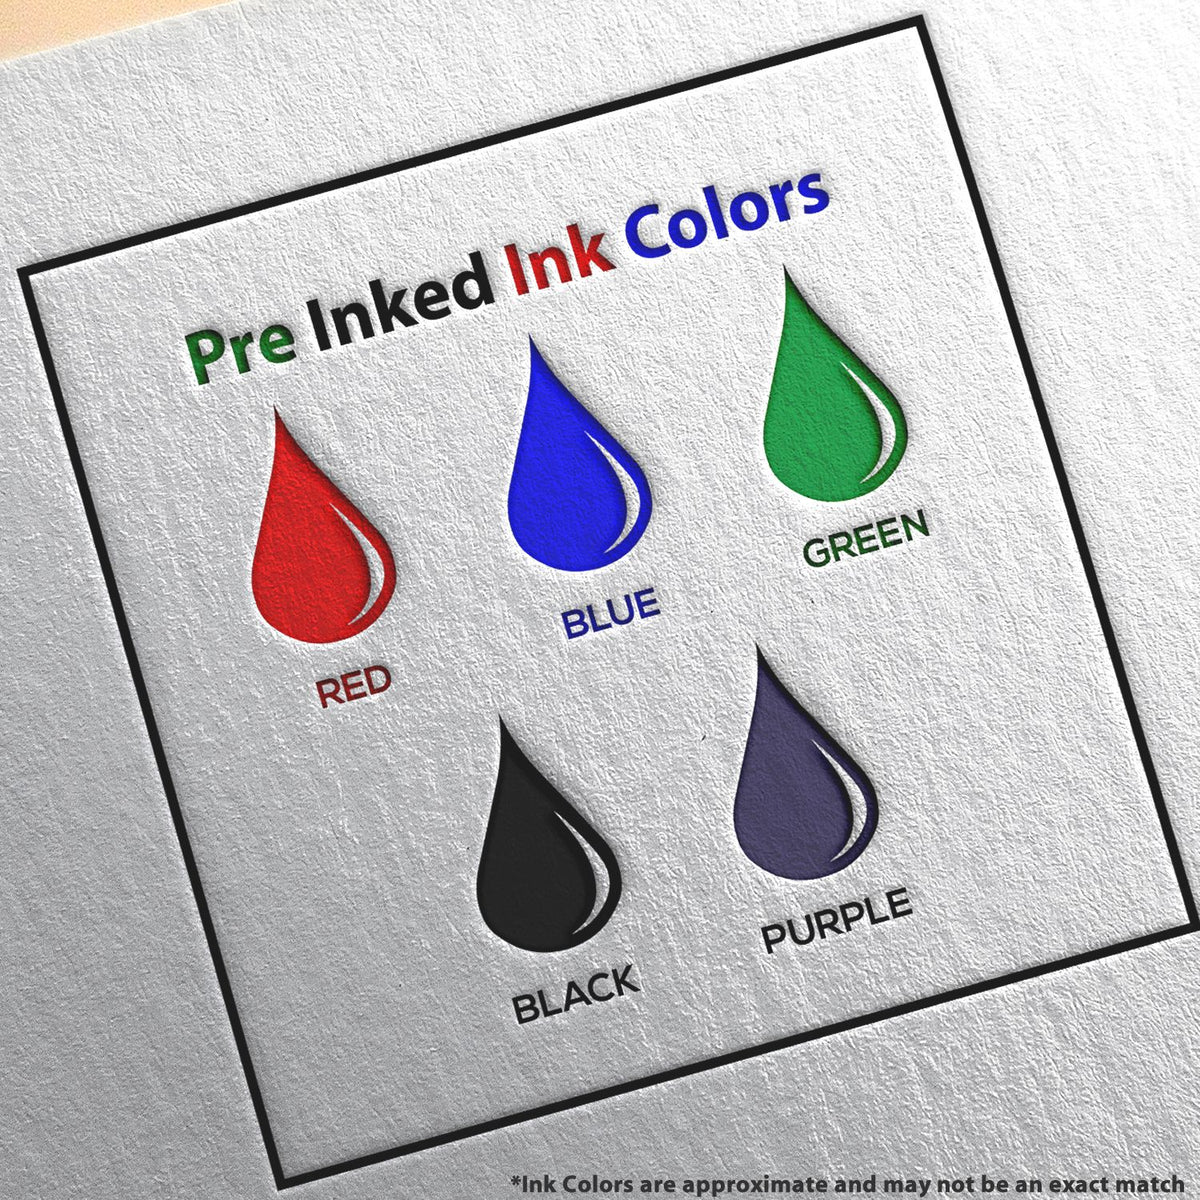 A picture showing the different ink colors or hues available for the Premium MaxLight Pre-Inked North Dakota Engineering Stamp product.